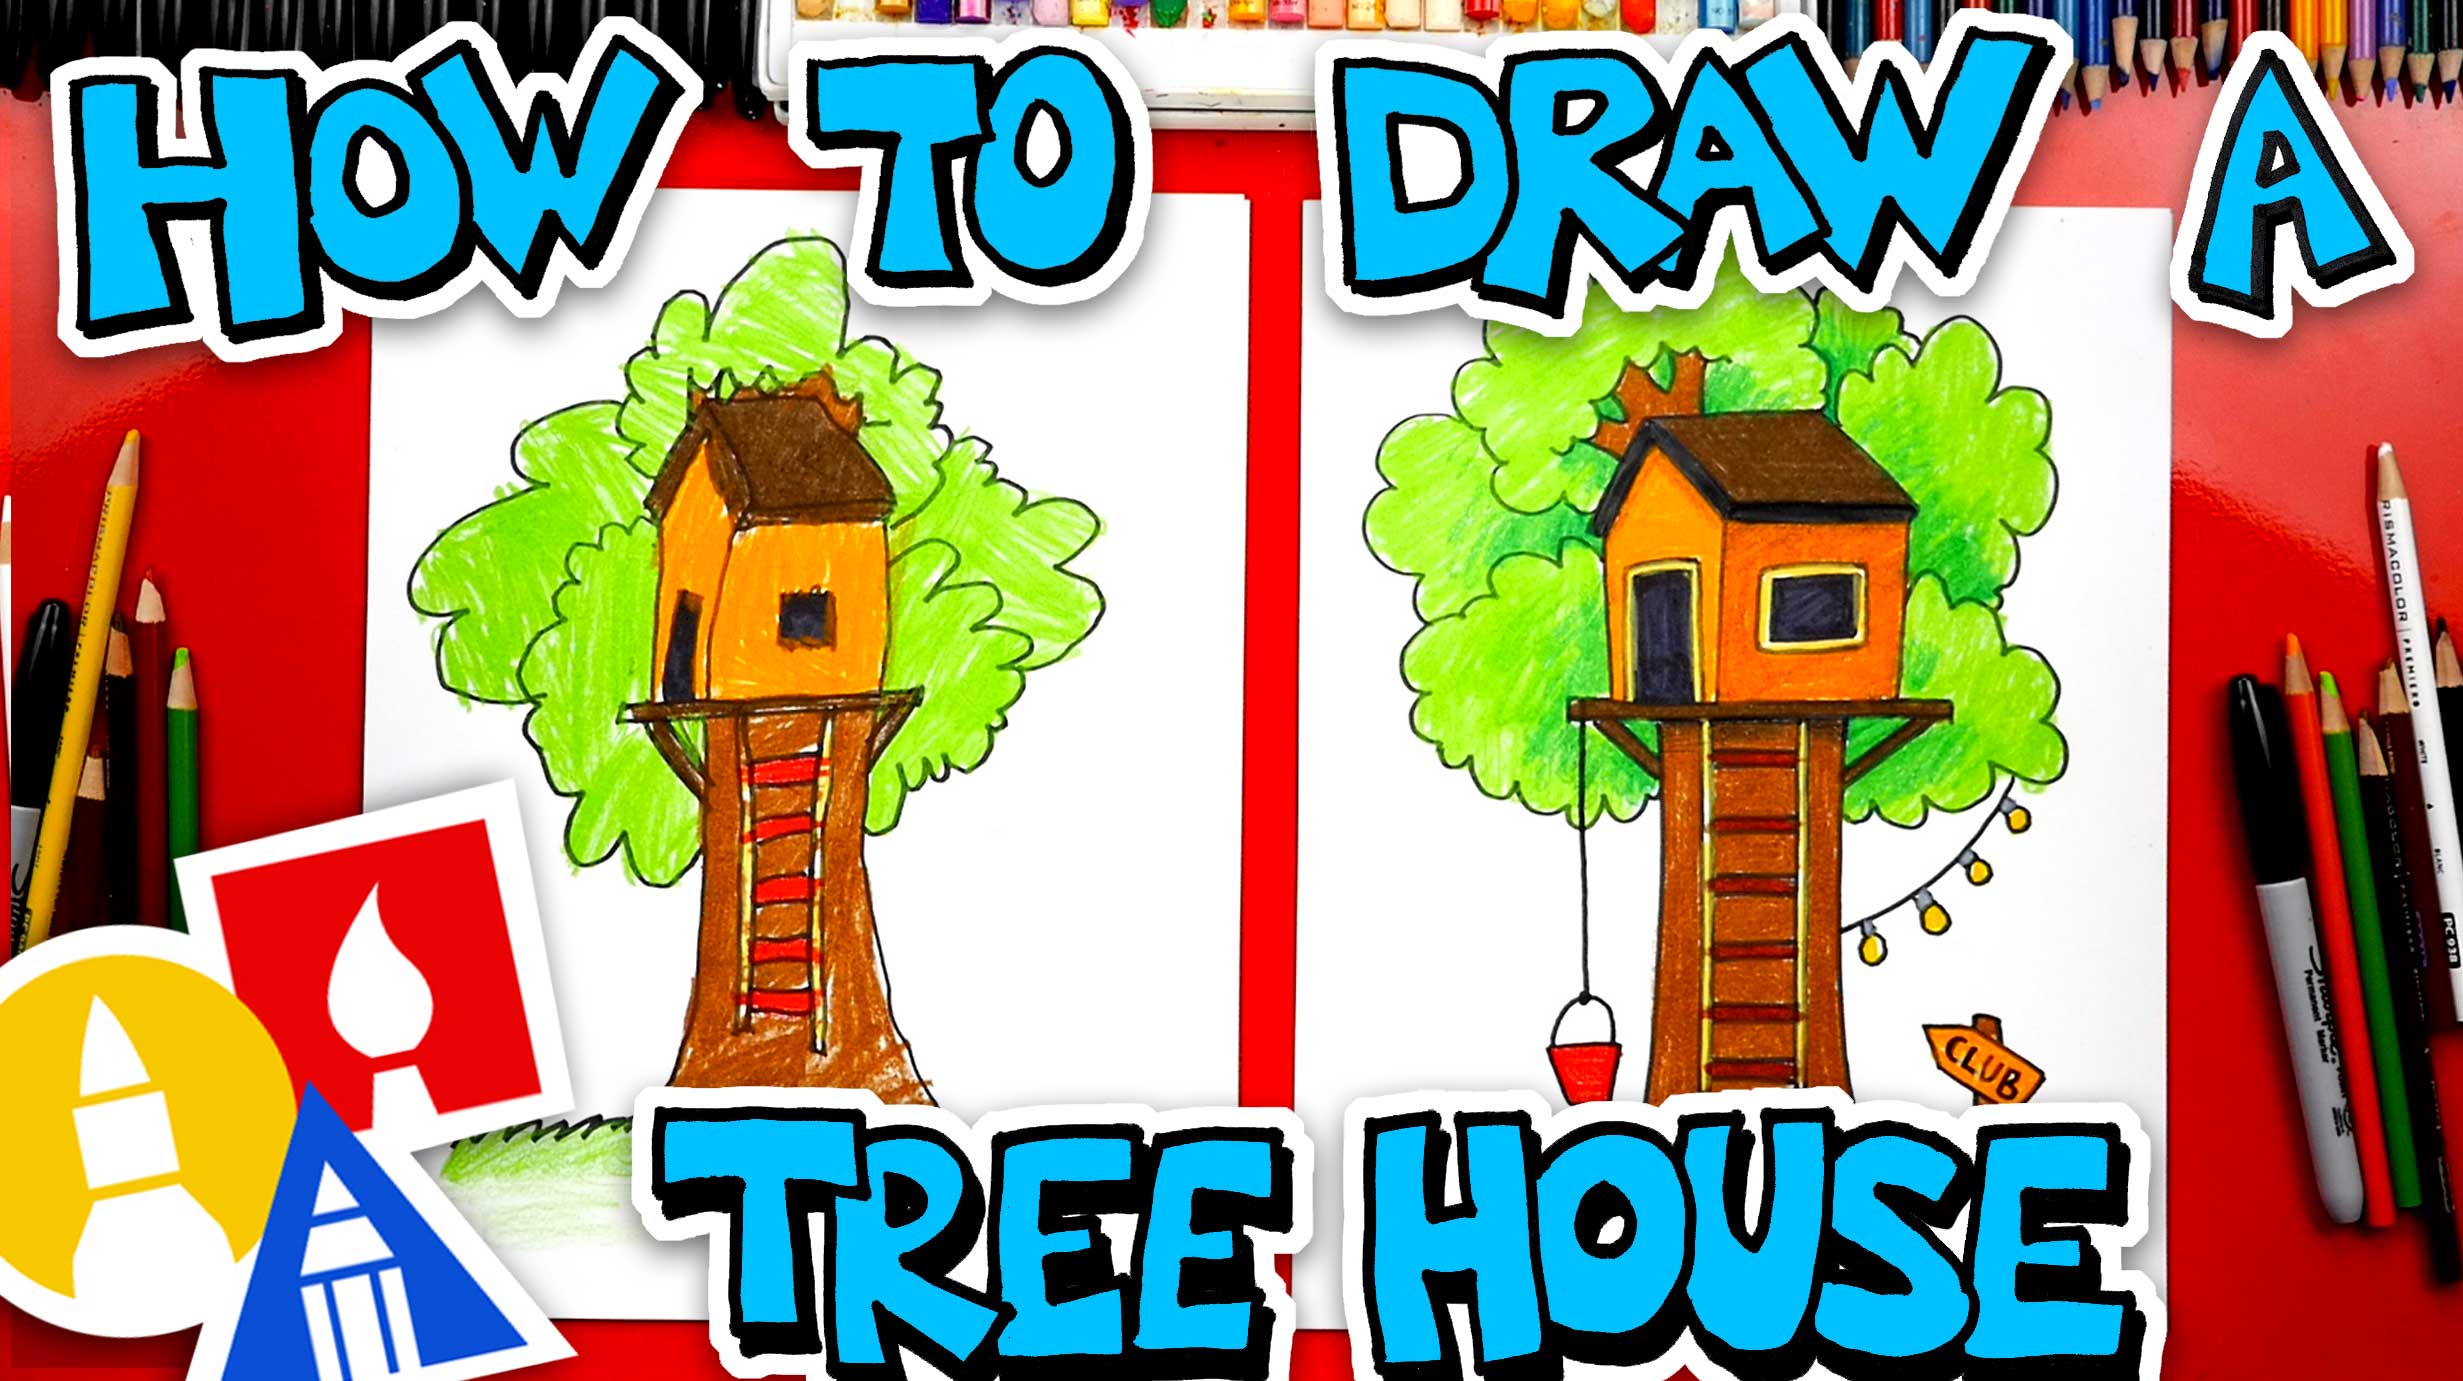 How To Draw A Tree For Kids - Learn how to draw a tree by following ...